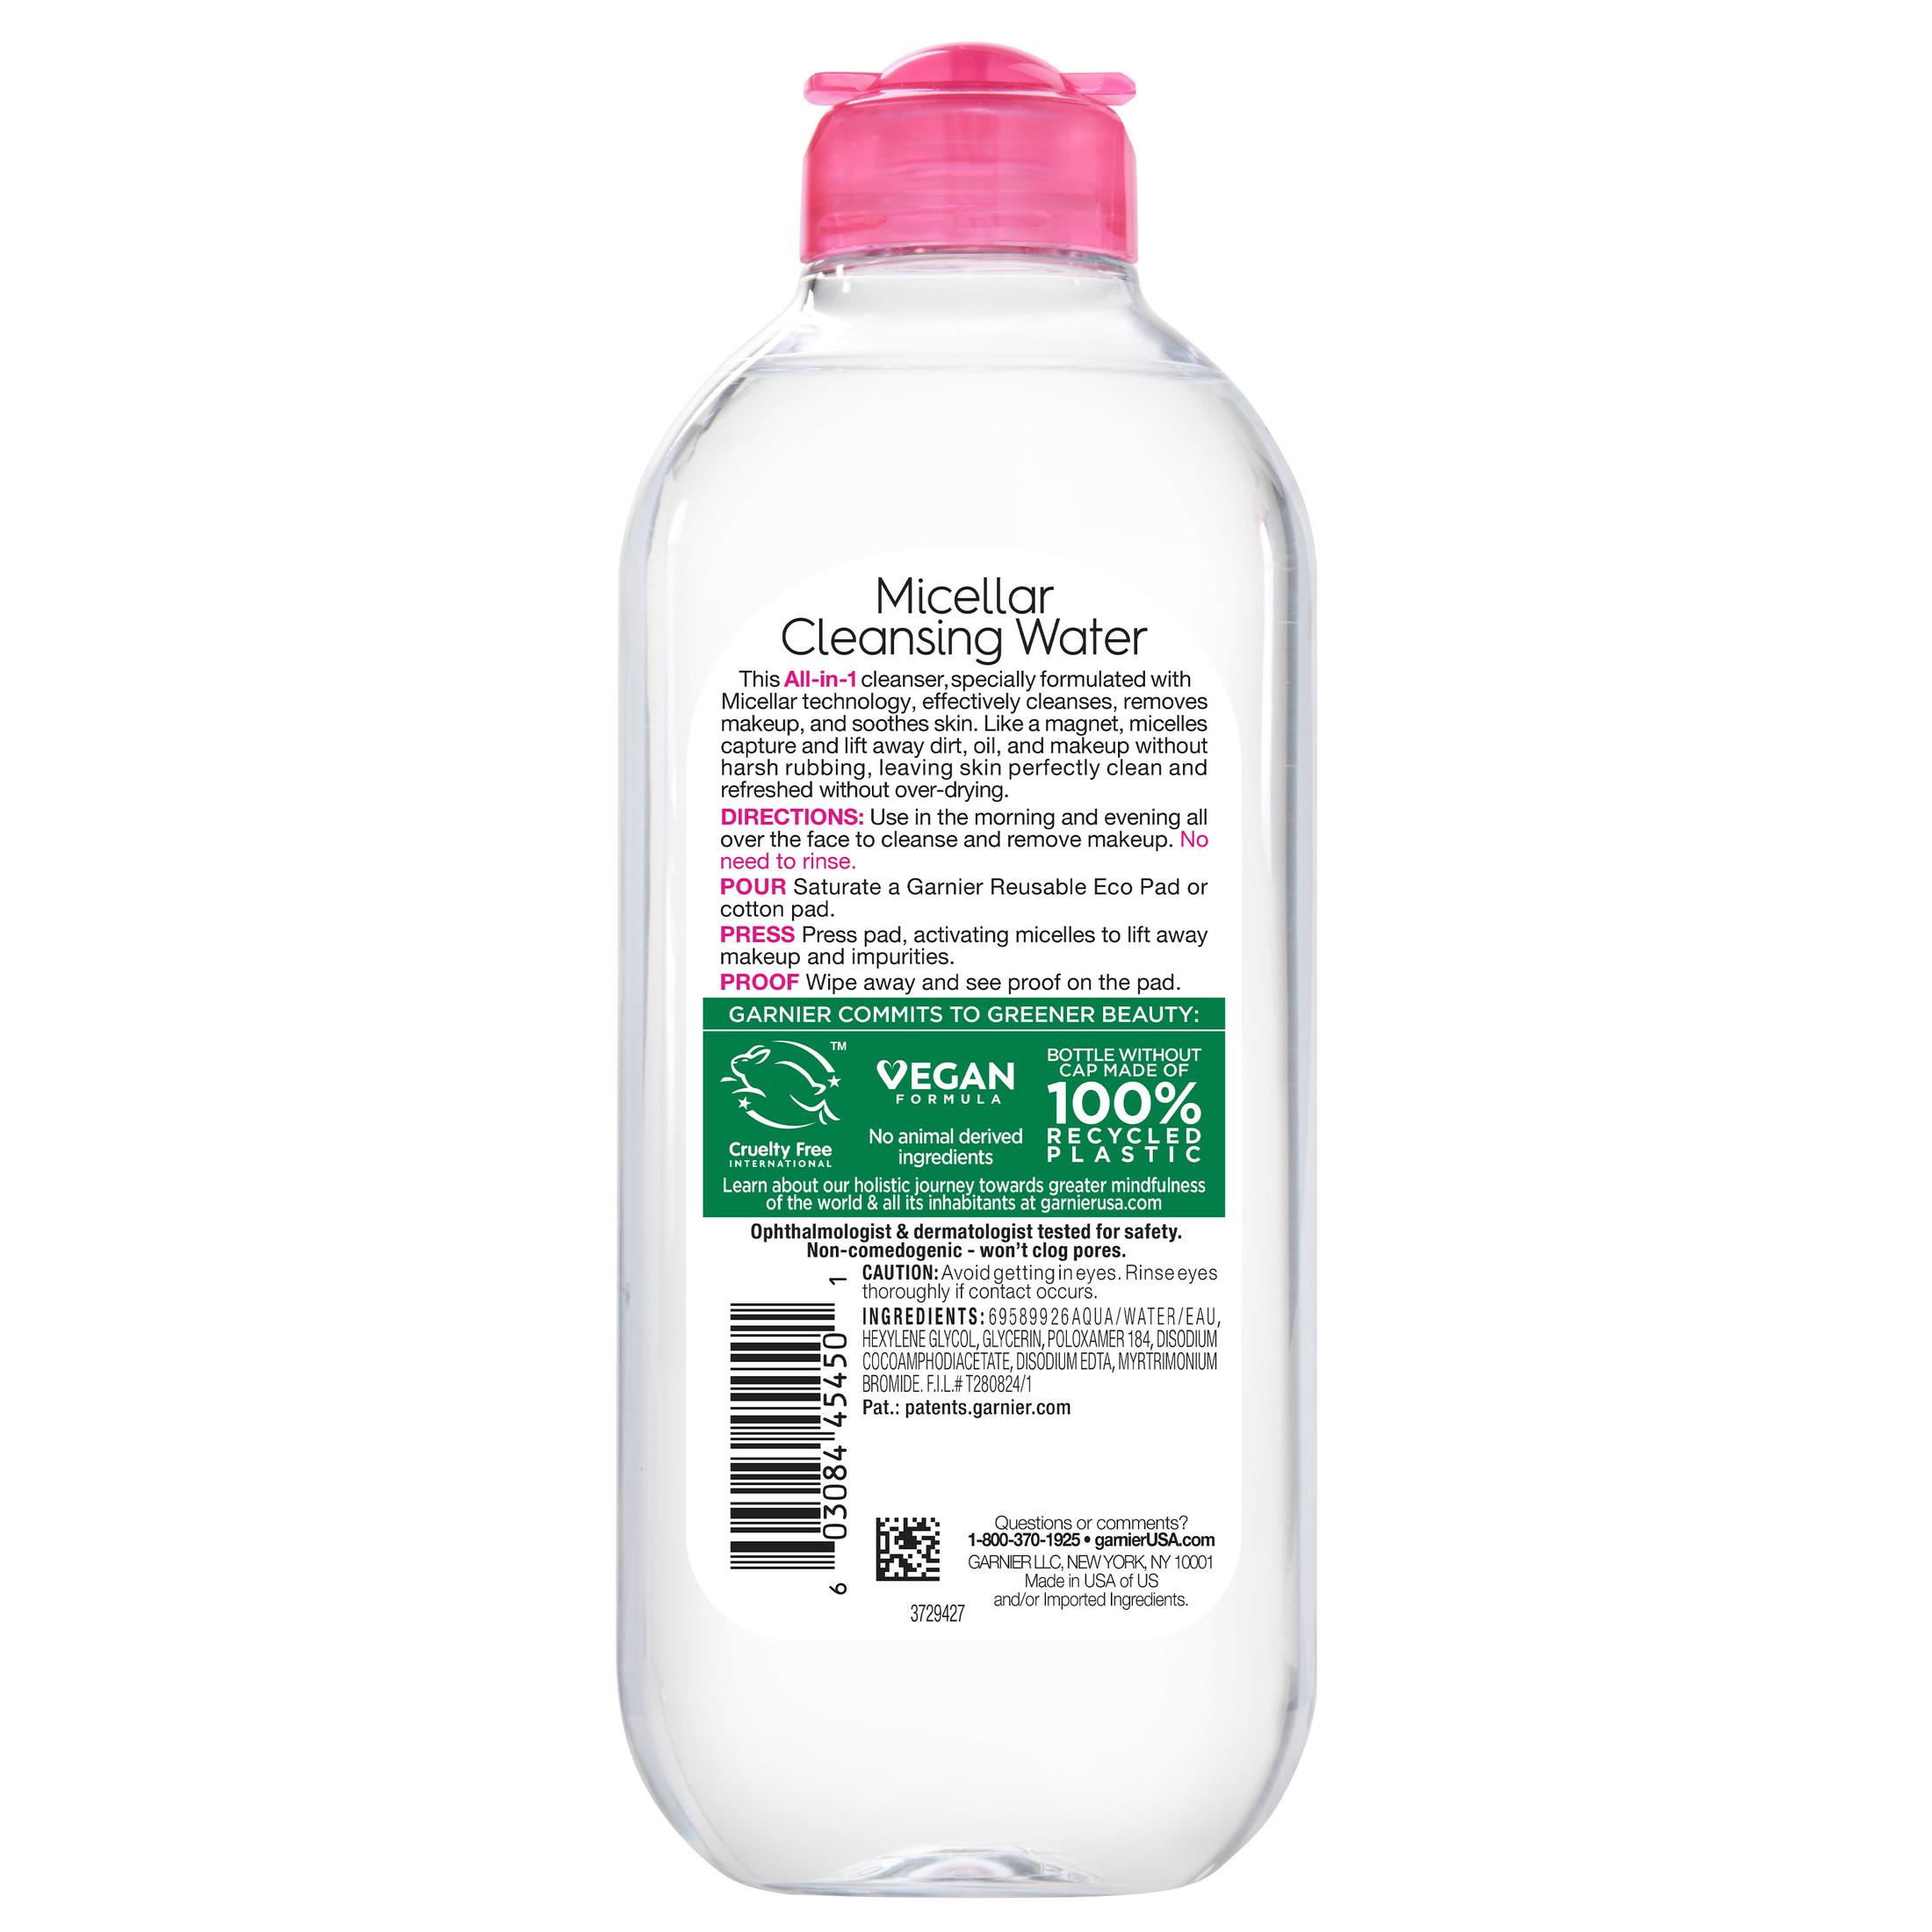 Garnier SkinActive Micellar Cleansing Water All in 1 Makeup Remover Cleanses, 13.5 fl oz - image 3 of 10